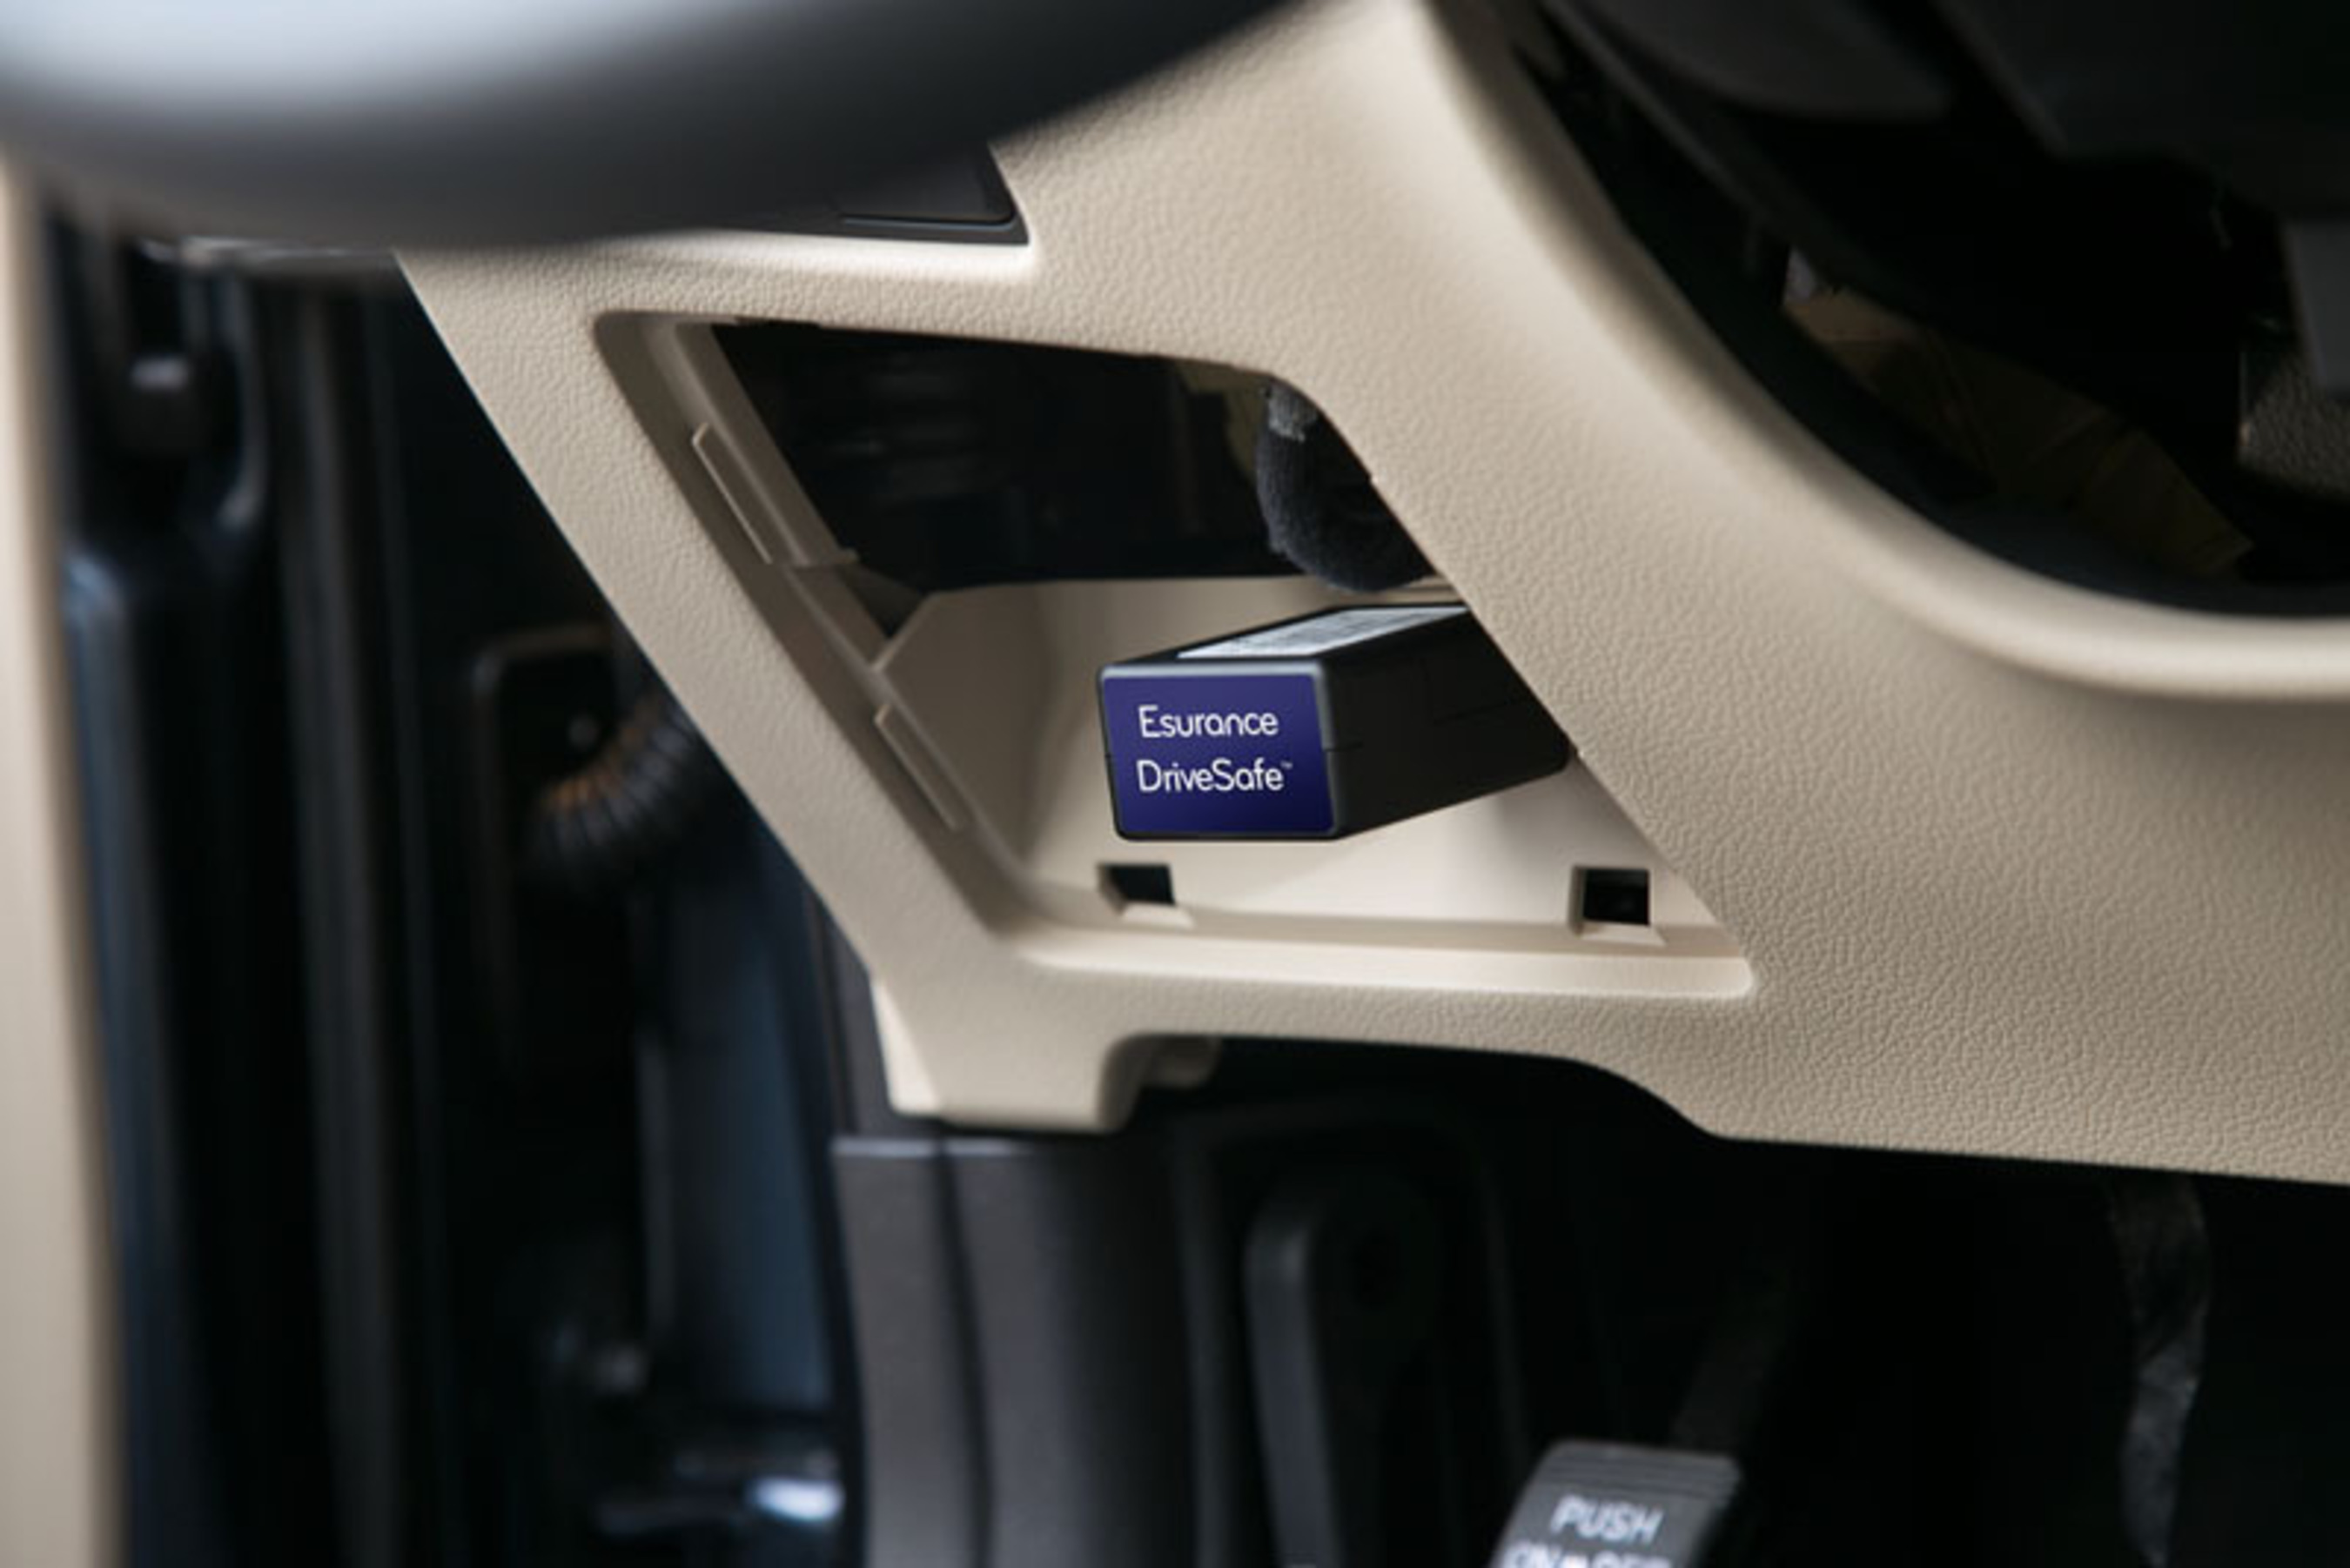 The Esurance DriveSafe device installs into a car's OBD-II port, allowing for fast and easy installation.(PRNewsFoto/Esurance) (PRNewsFoto/ESURANCE)